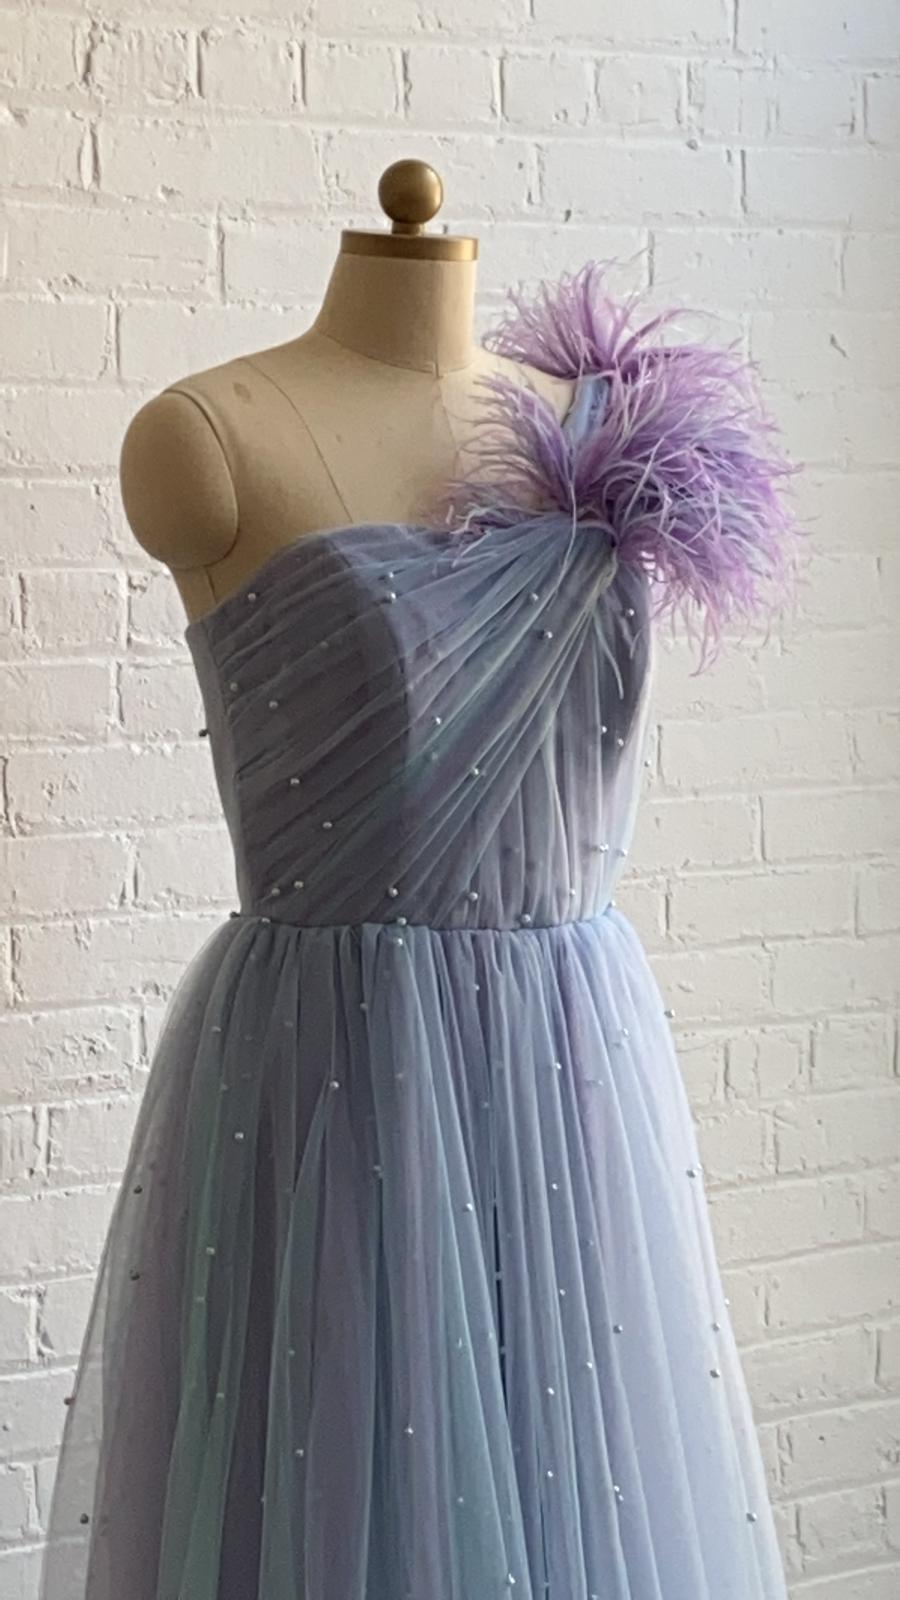 Purple A-Line dress with feathers and one shoulder sleeve